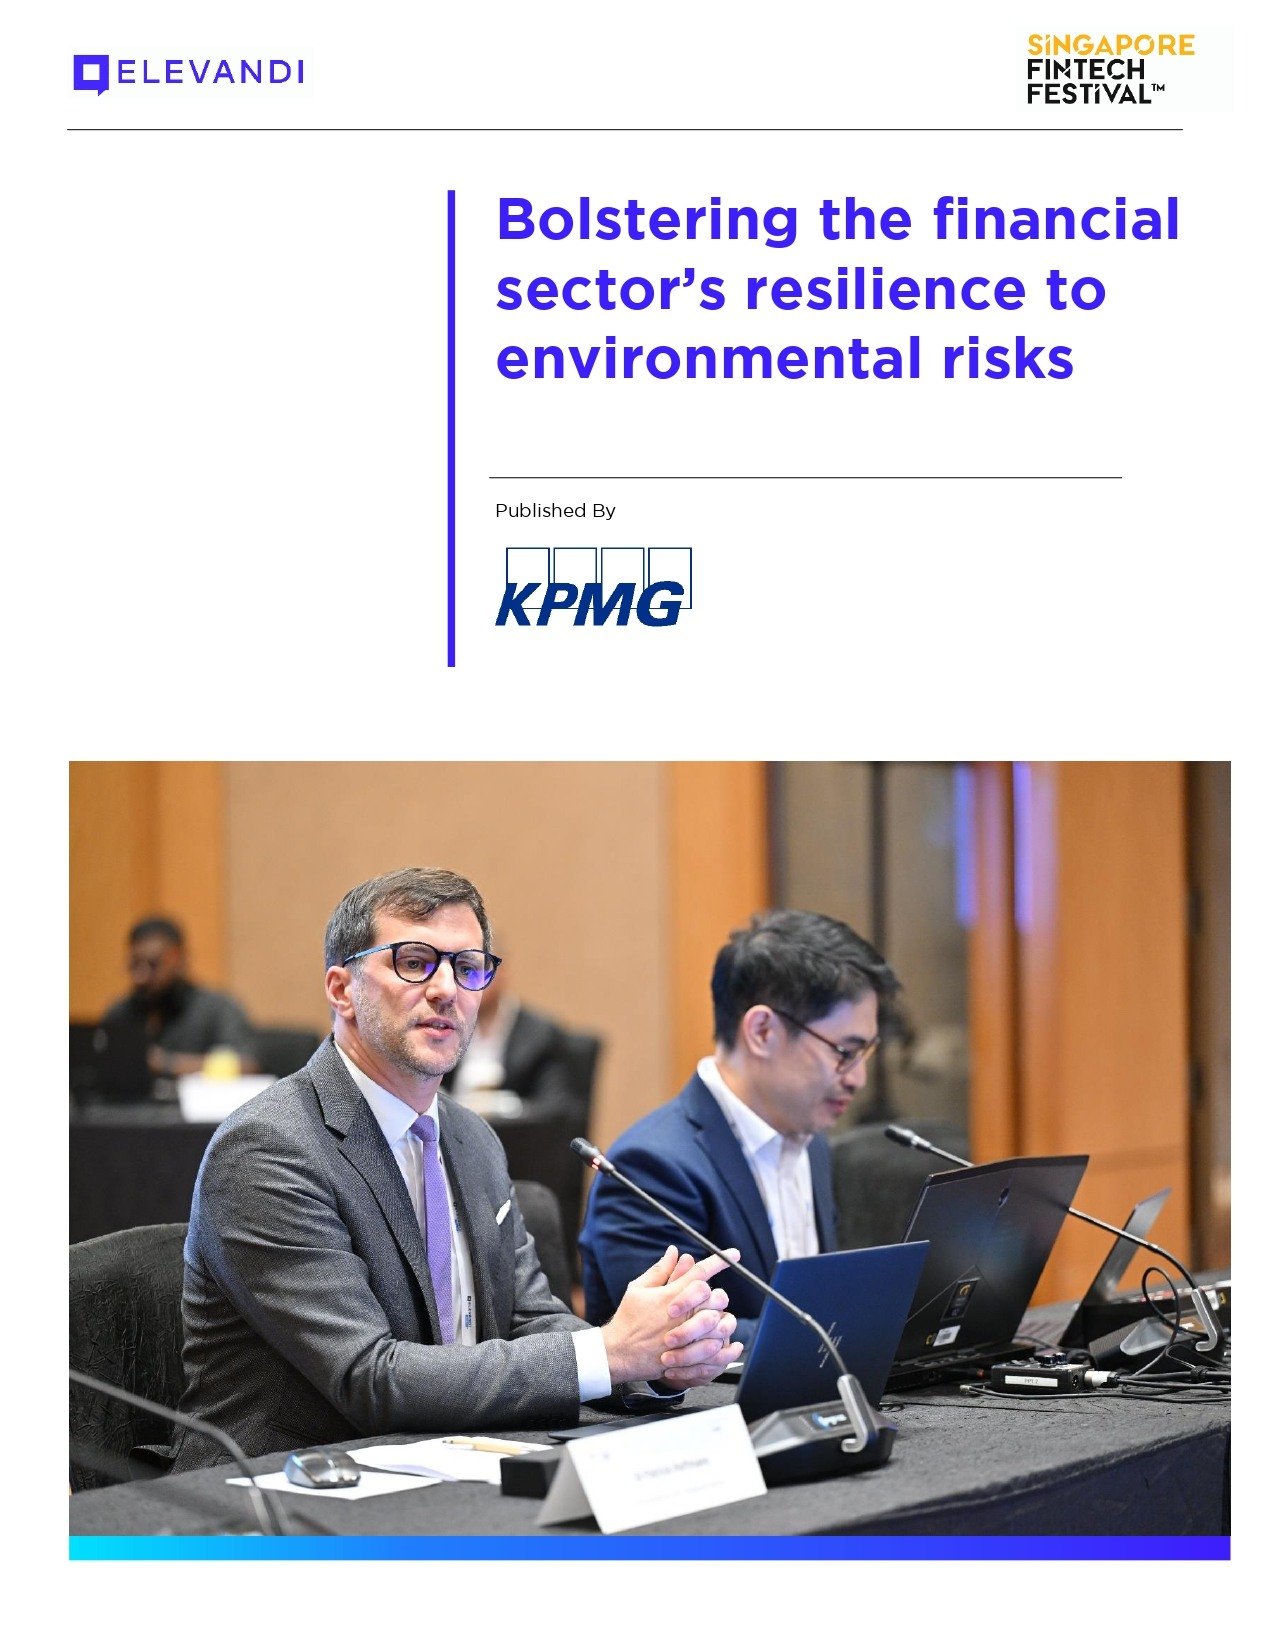 KPMGxElevandi-Bolstering-the-Financial-Sector-Resilience-to-Environmental-Risks-1